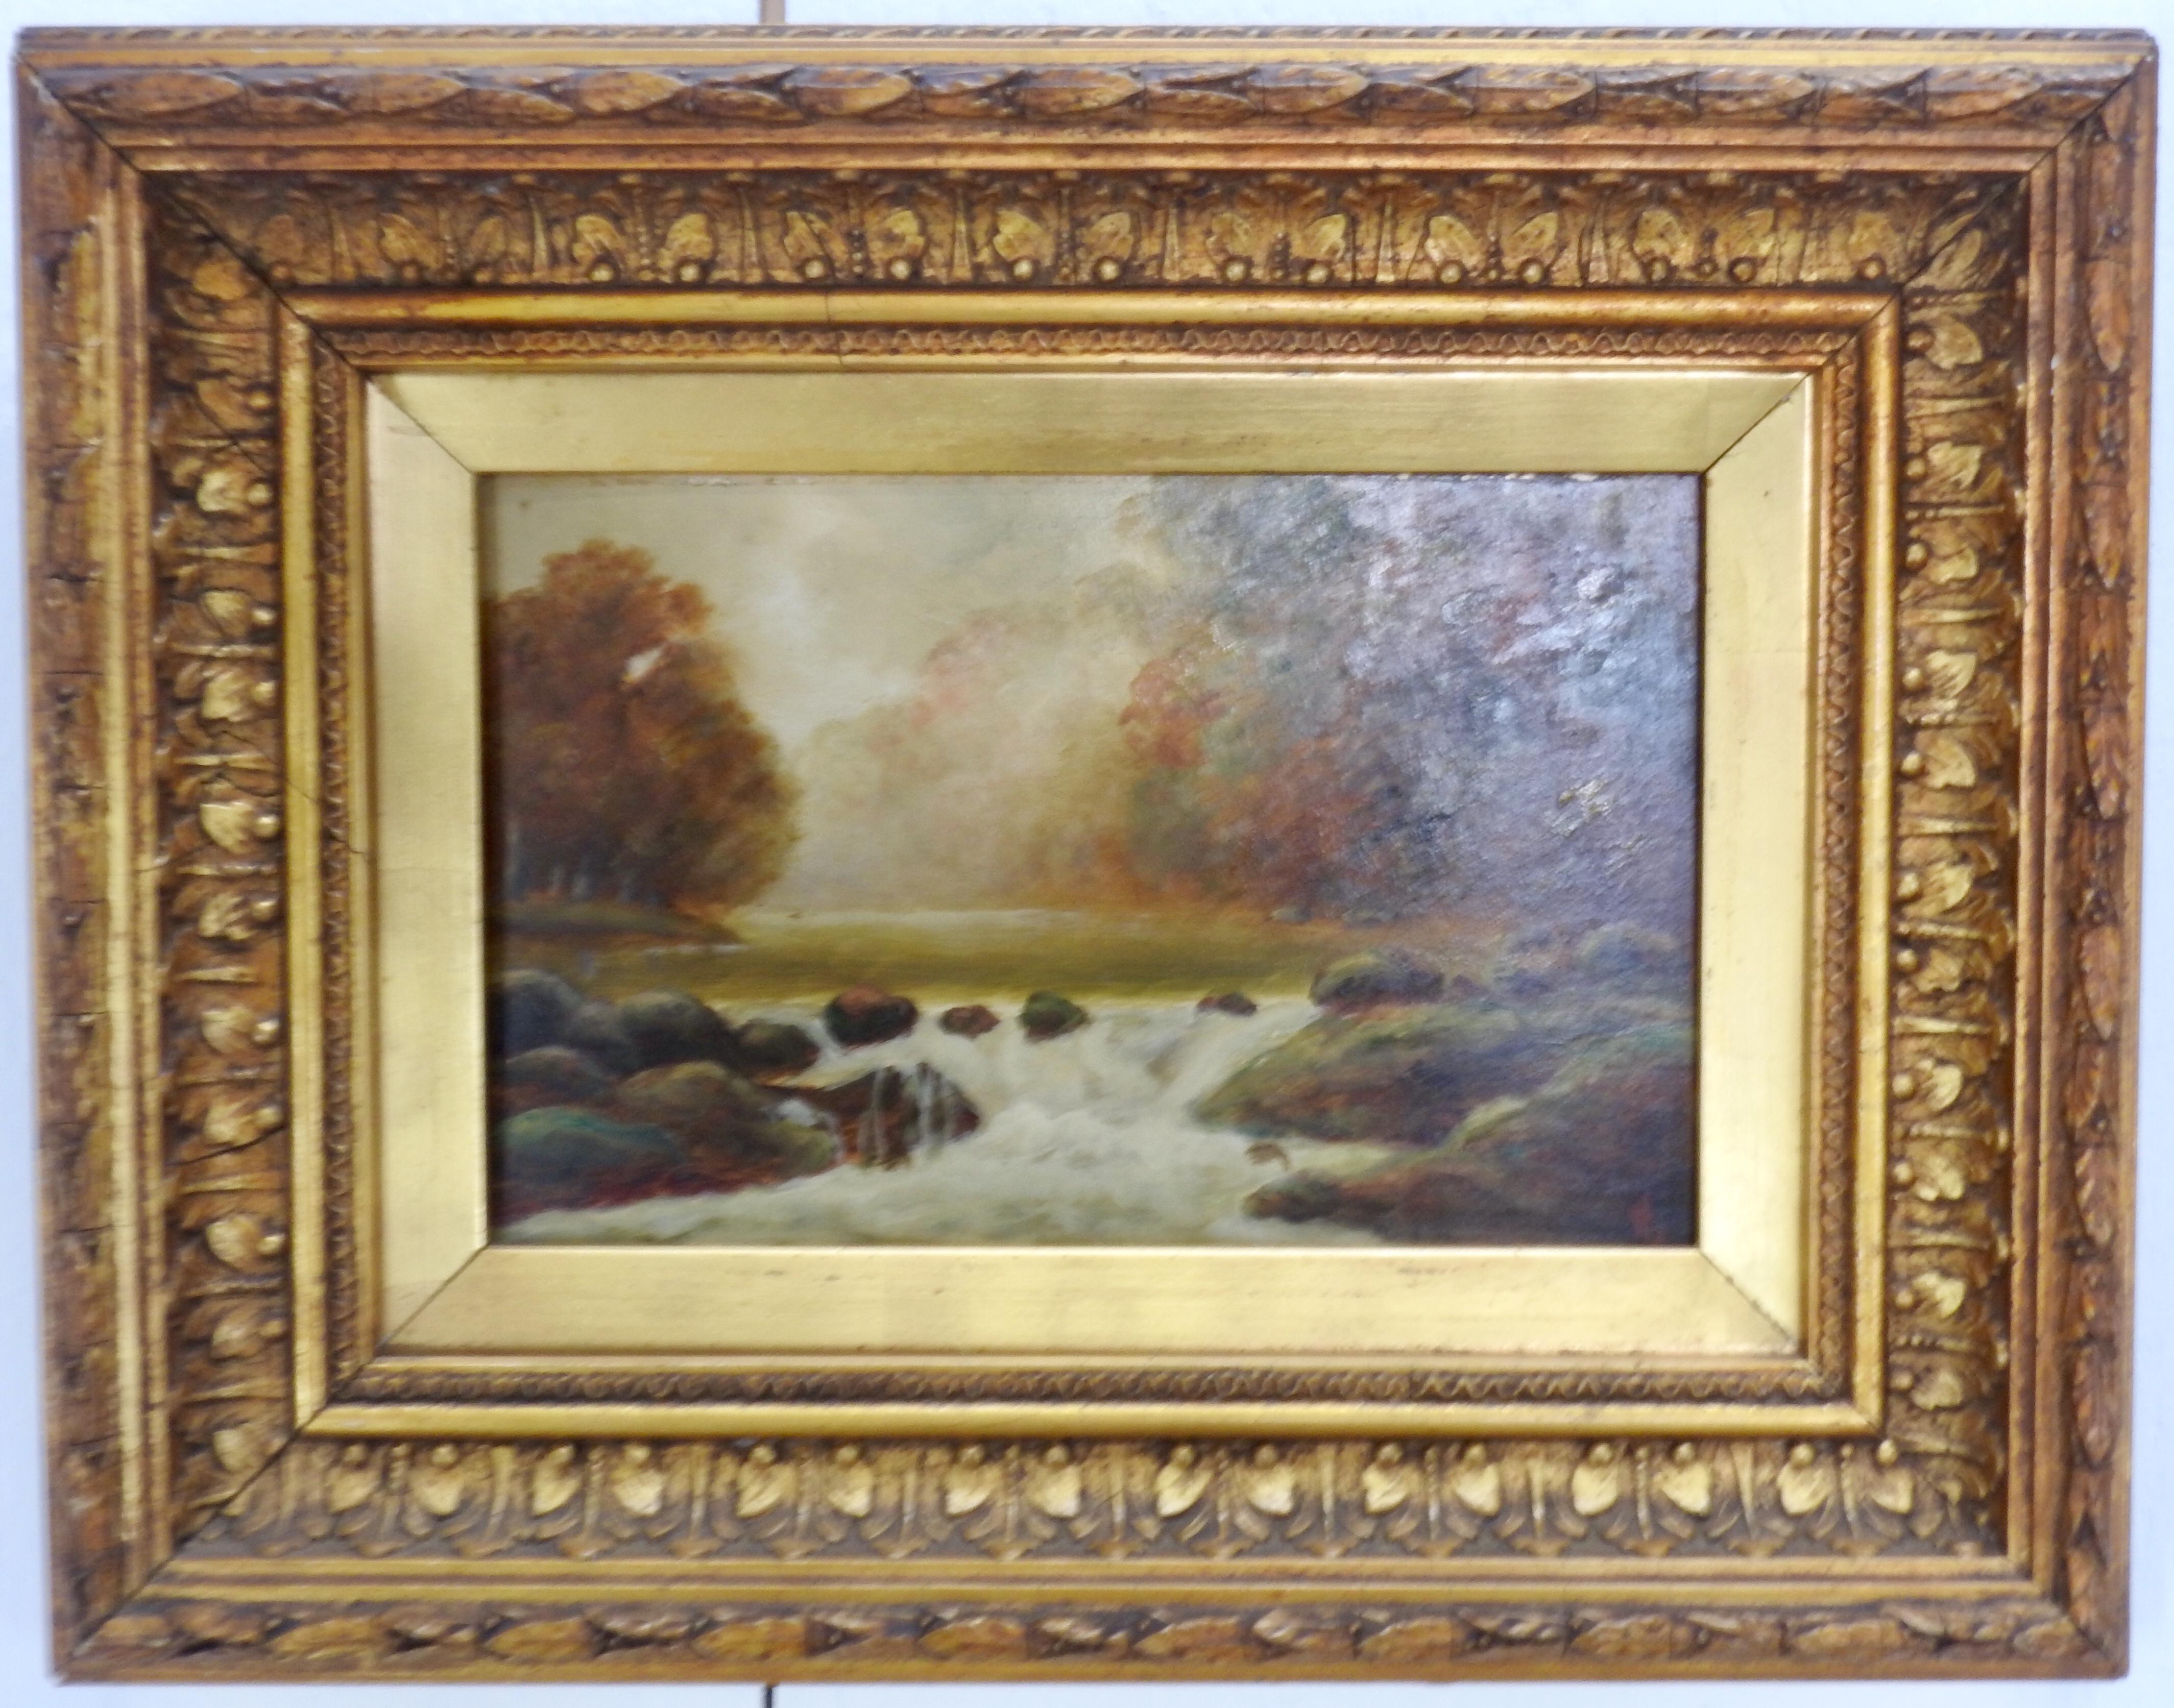 Pair of artist signed oil on board landscape paintings encased in ornate gilt frames. The paintings are signed with initials. Painted on prepared Students' Academy Board by Wilson & Newton of London, England. This company was founded in the 1830s.